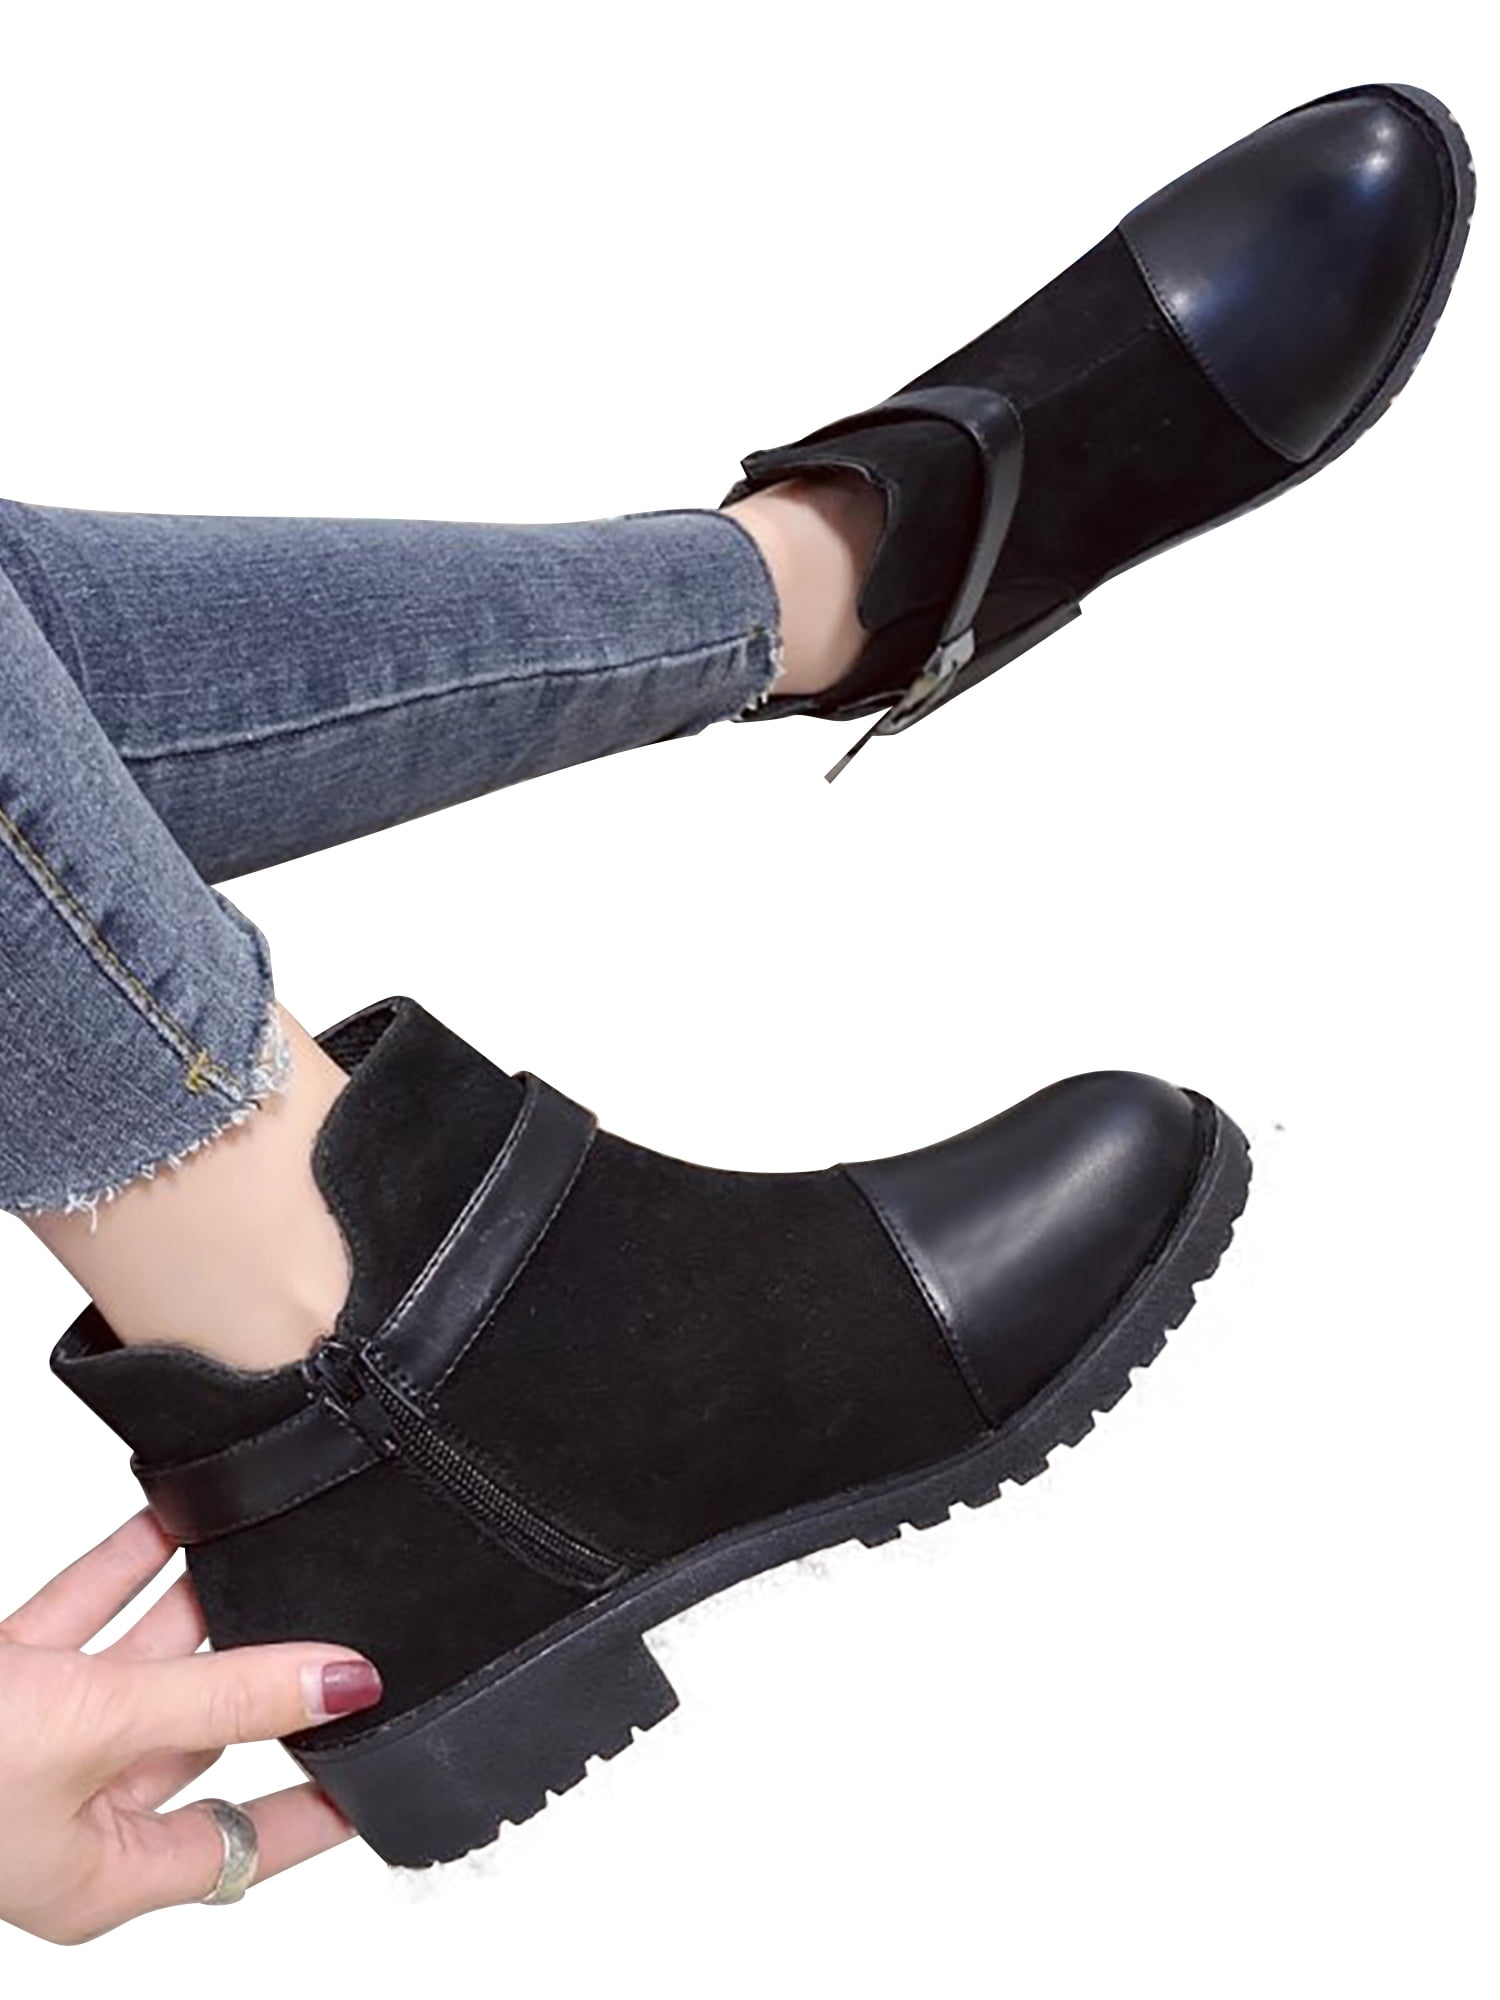 Lallc - Women's Winter Ankle Boots Buckle Round Toe Shoes Non Slip Ski ...